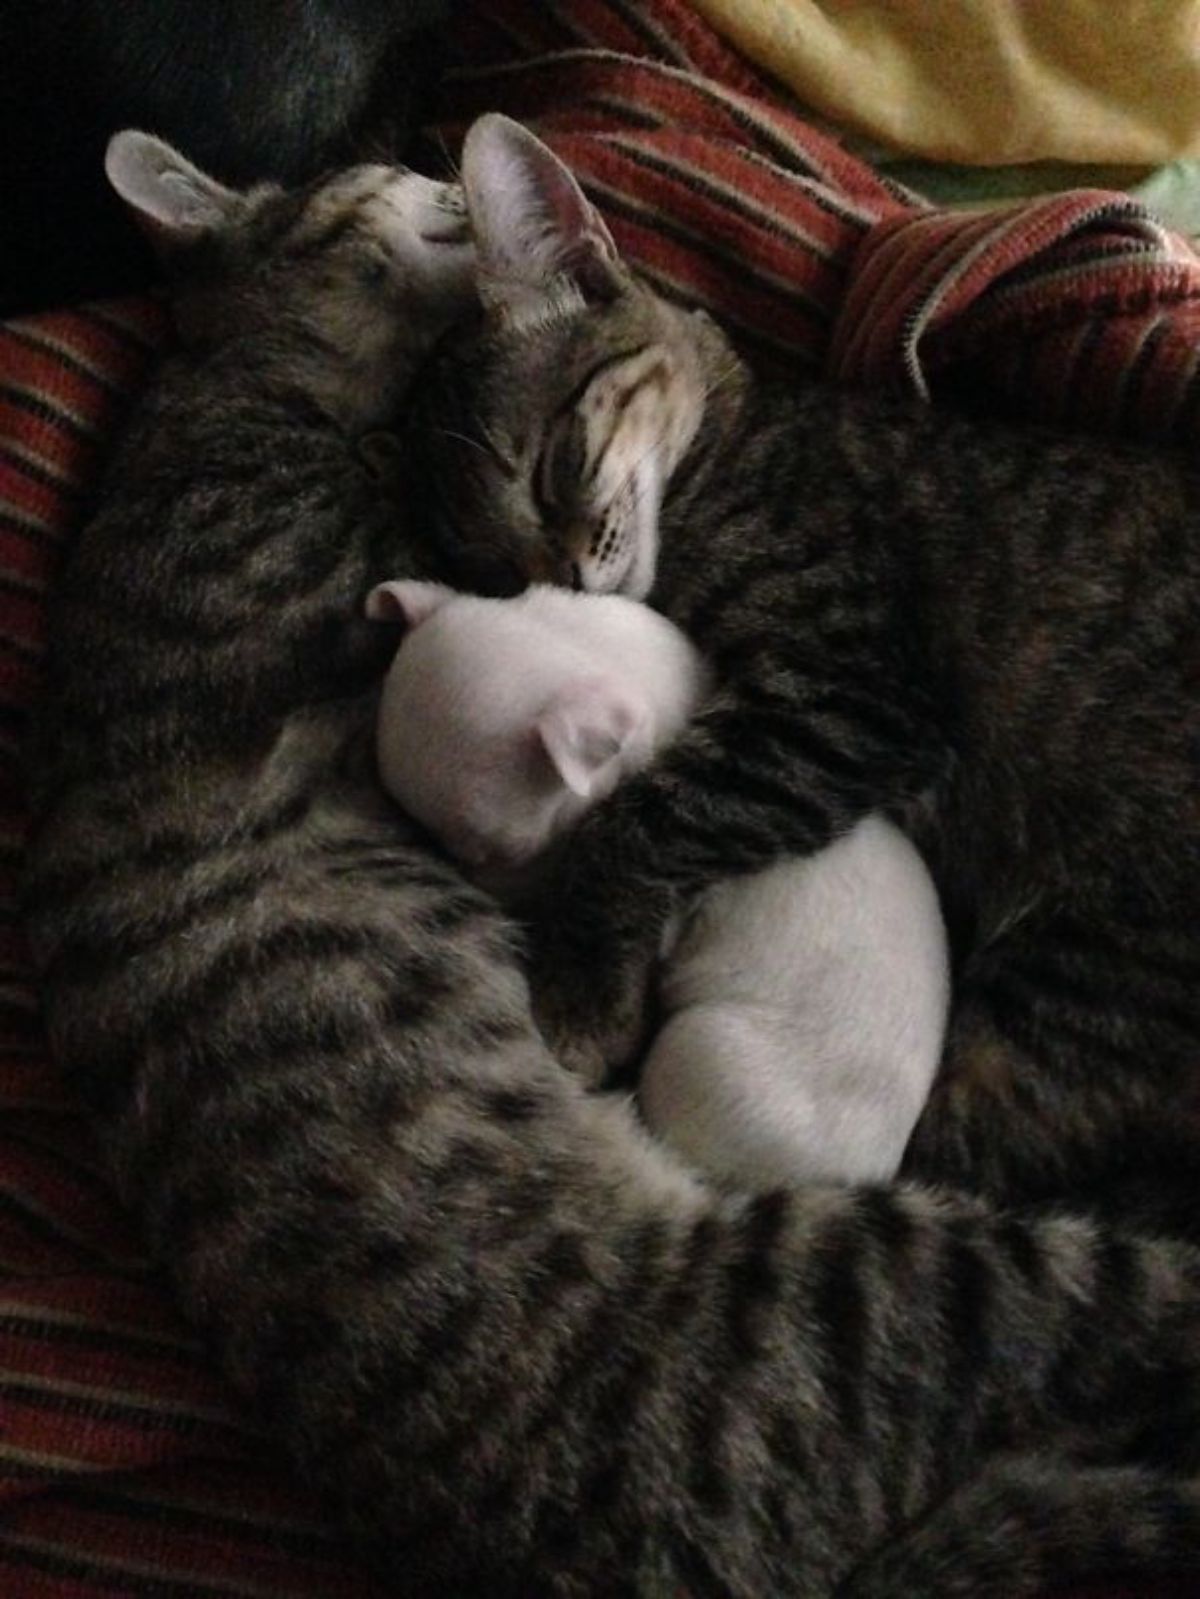 two grey tabby cats sleeping and cuddling a white puppy between them